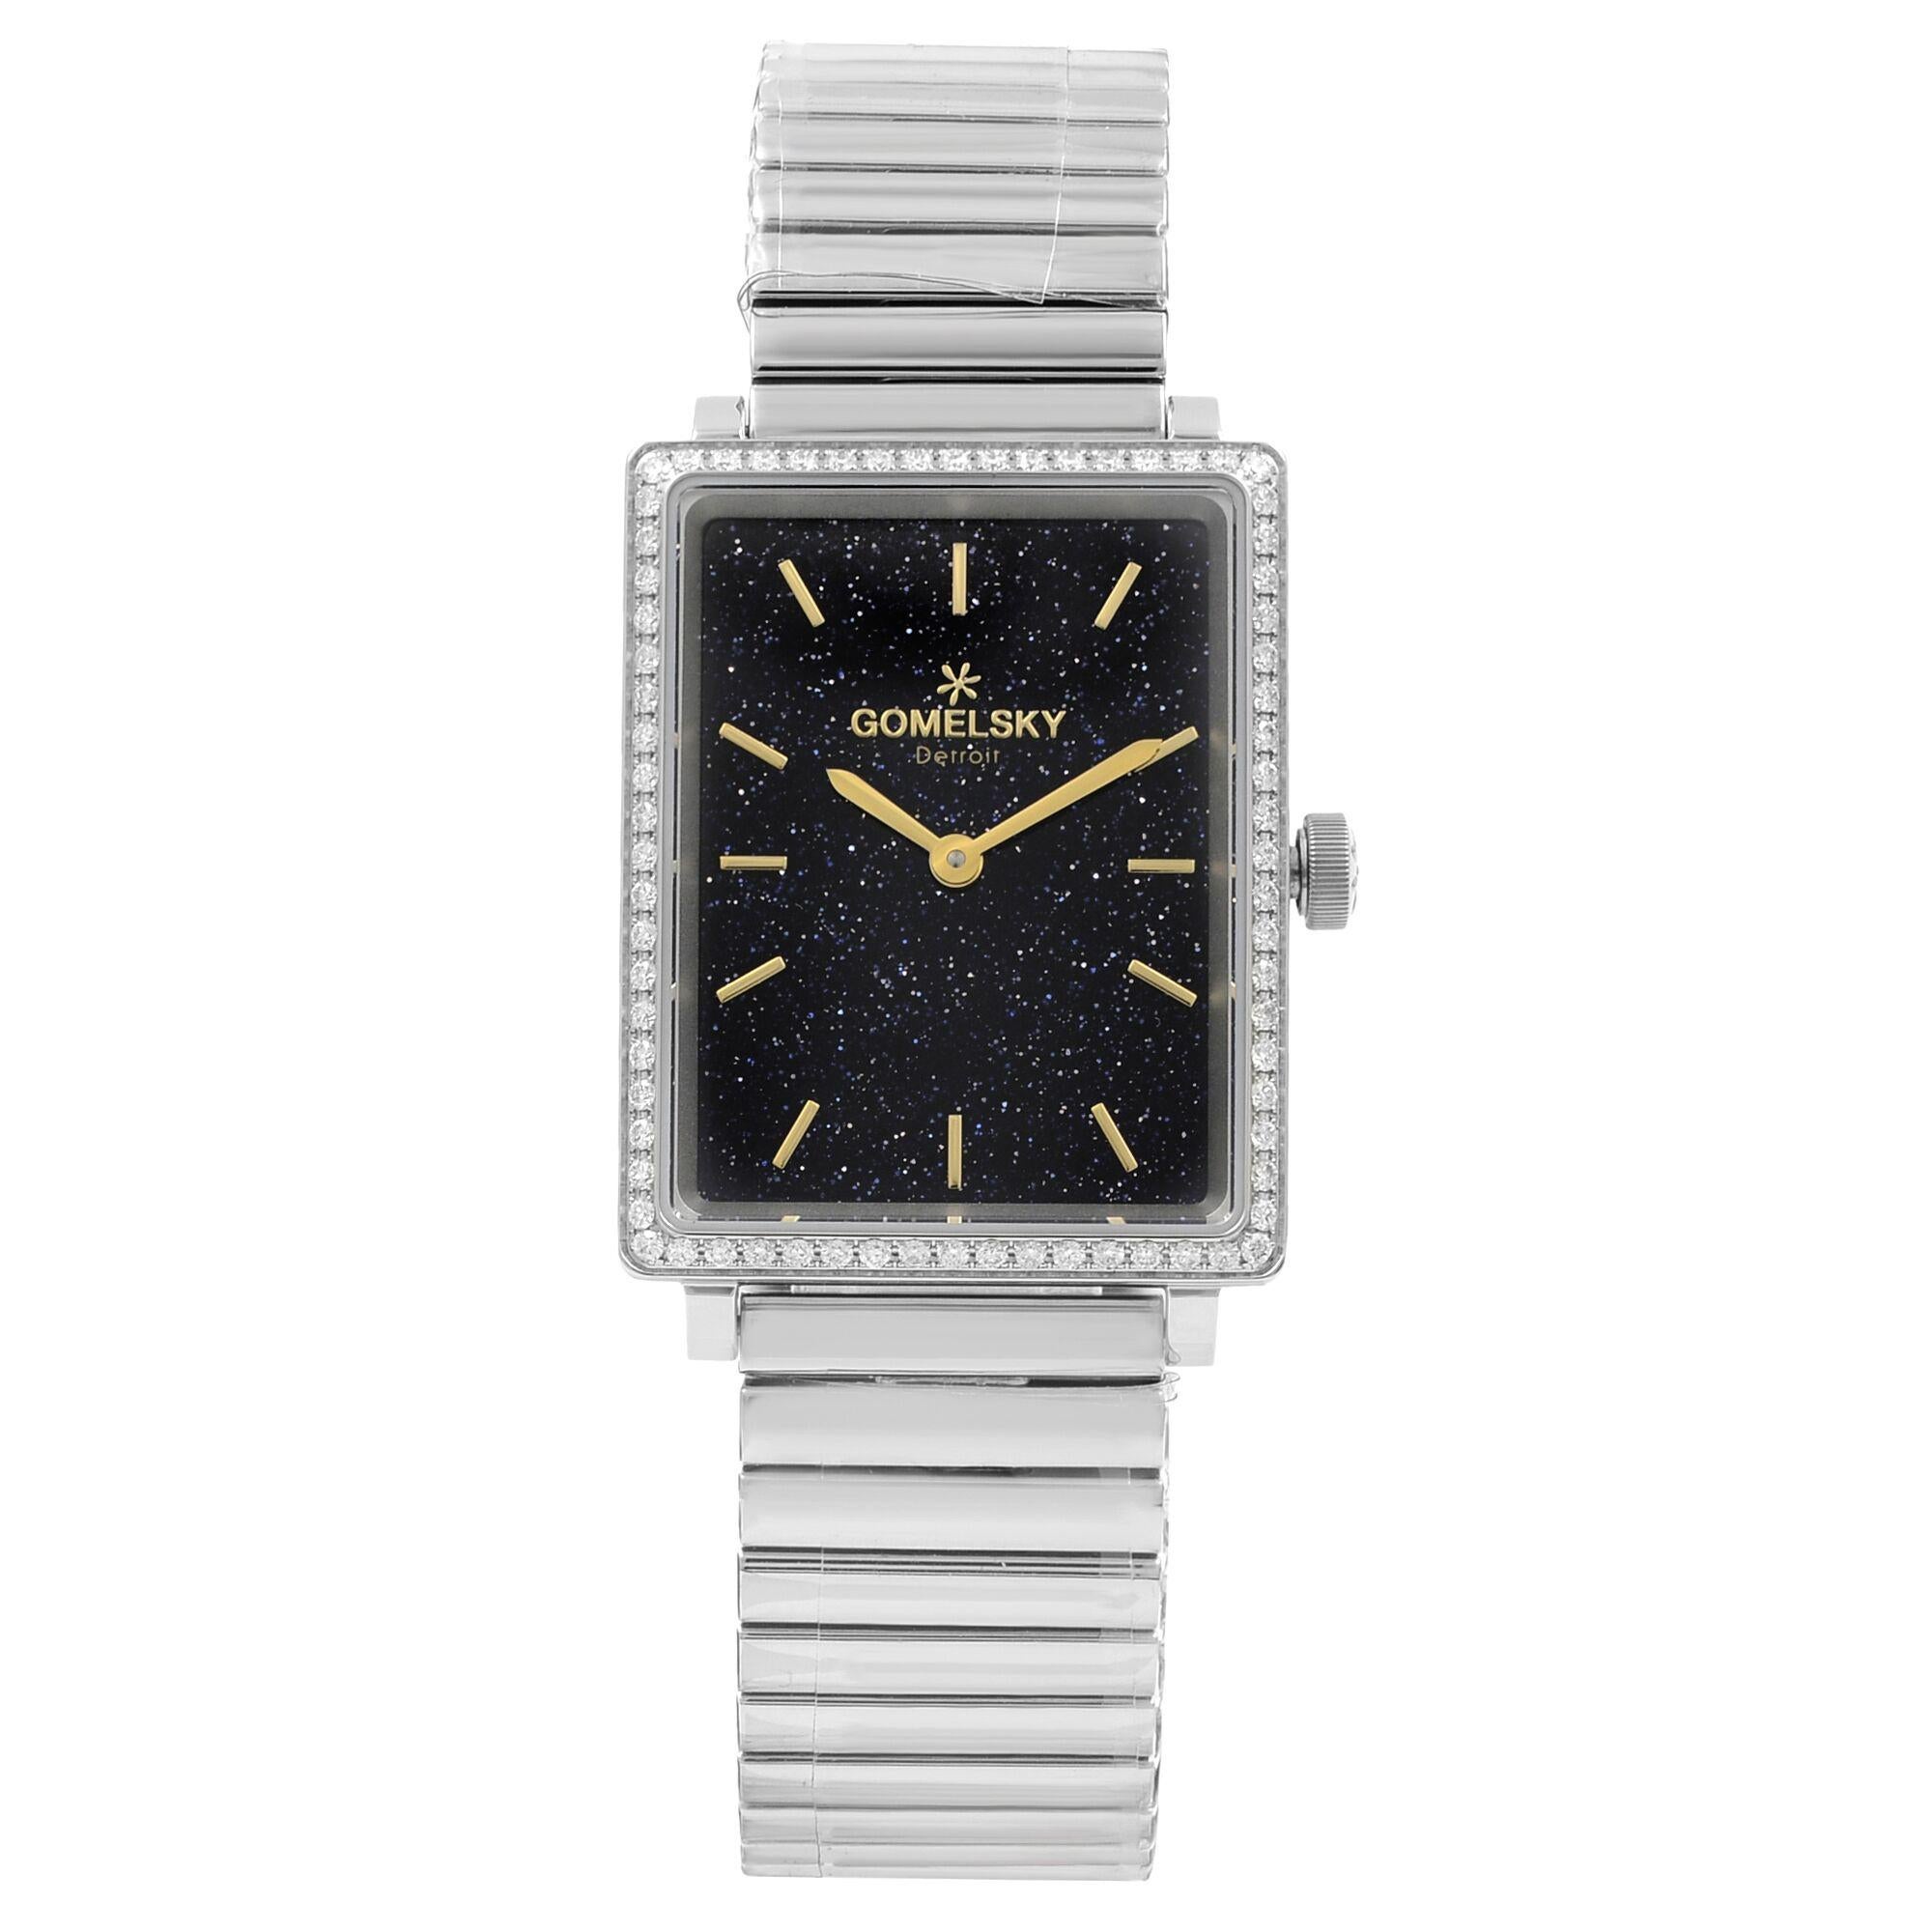 This brand new Gomelsky Shirley Fromer  G0120072643 is a beautiful Ladies timepiece that is powered by a quartz movement which is cased in a stainless steel case. It has a  rectangle shape face,  dial, and has hand sticks style markers. It is